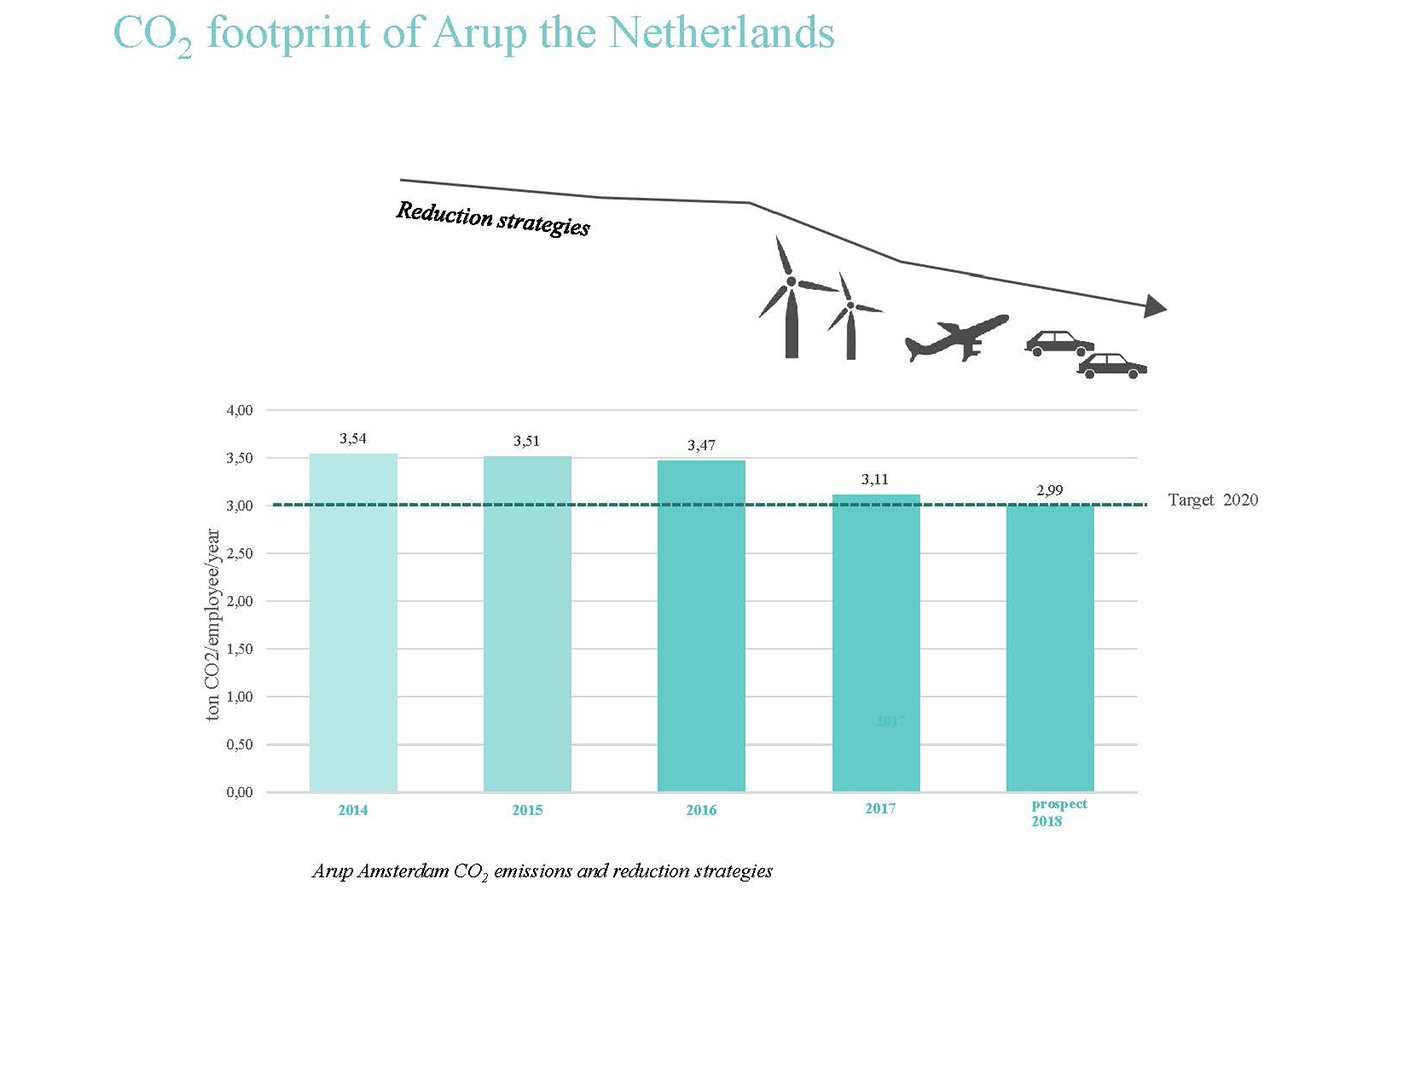 Arup Amsterdam CO2 emissions and reduction strategies